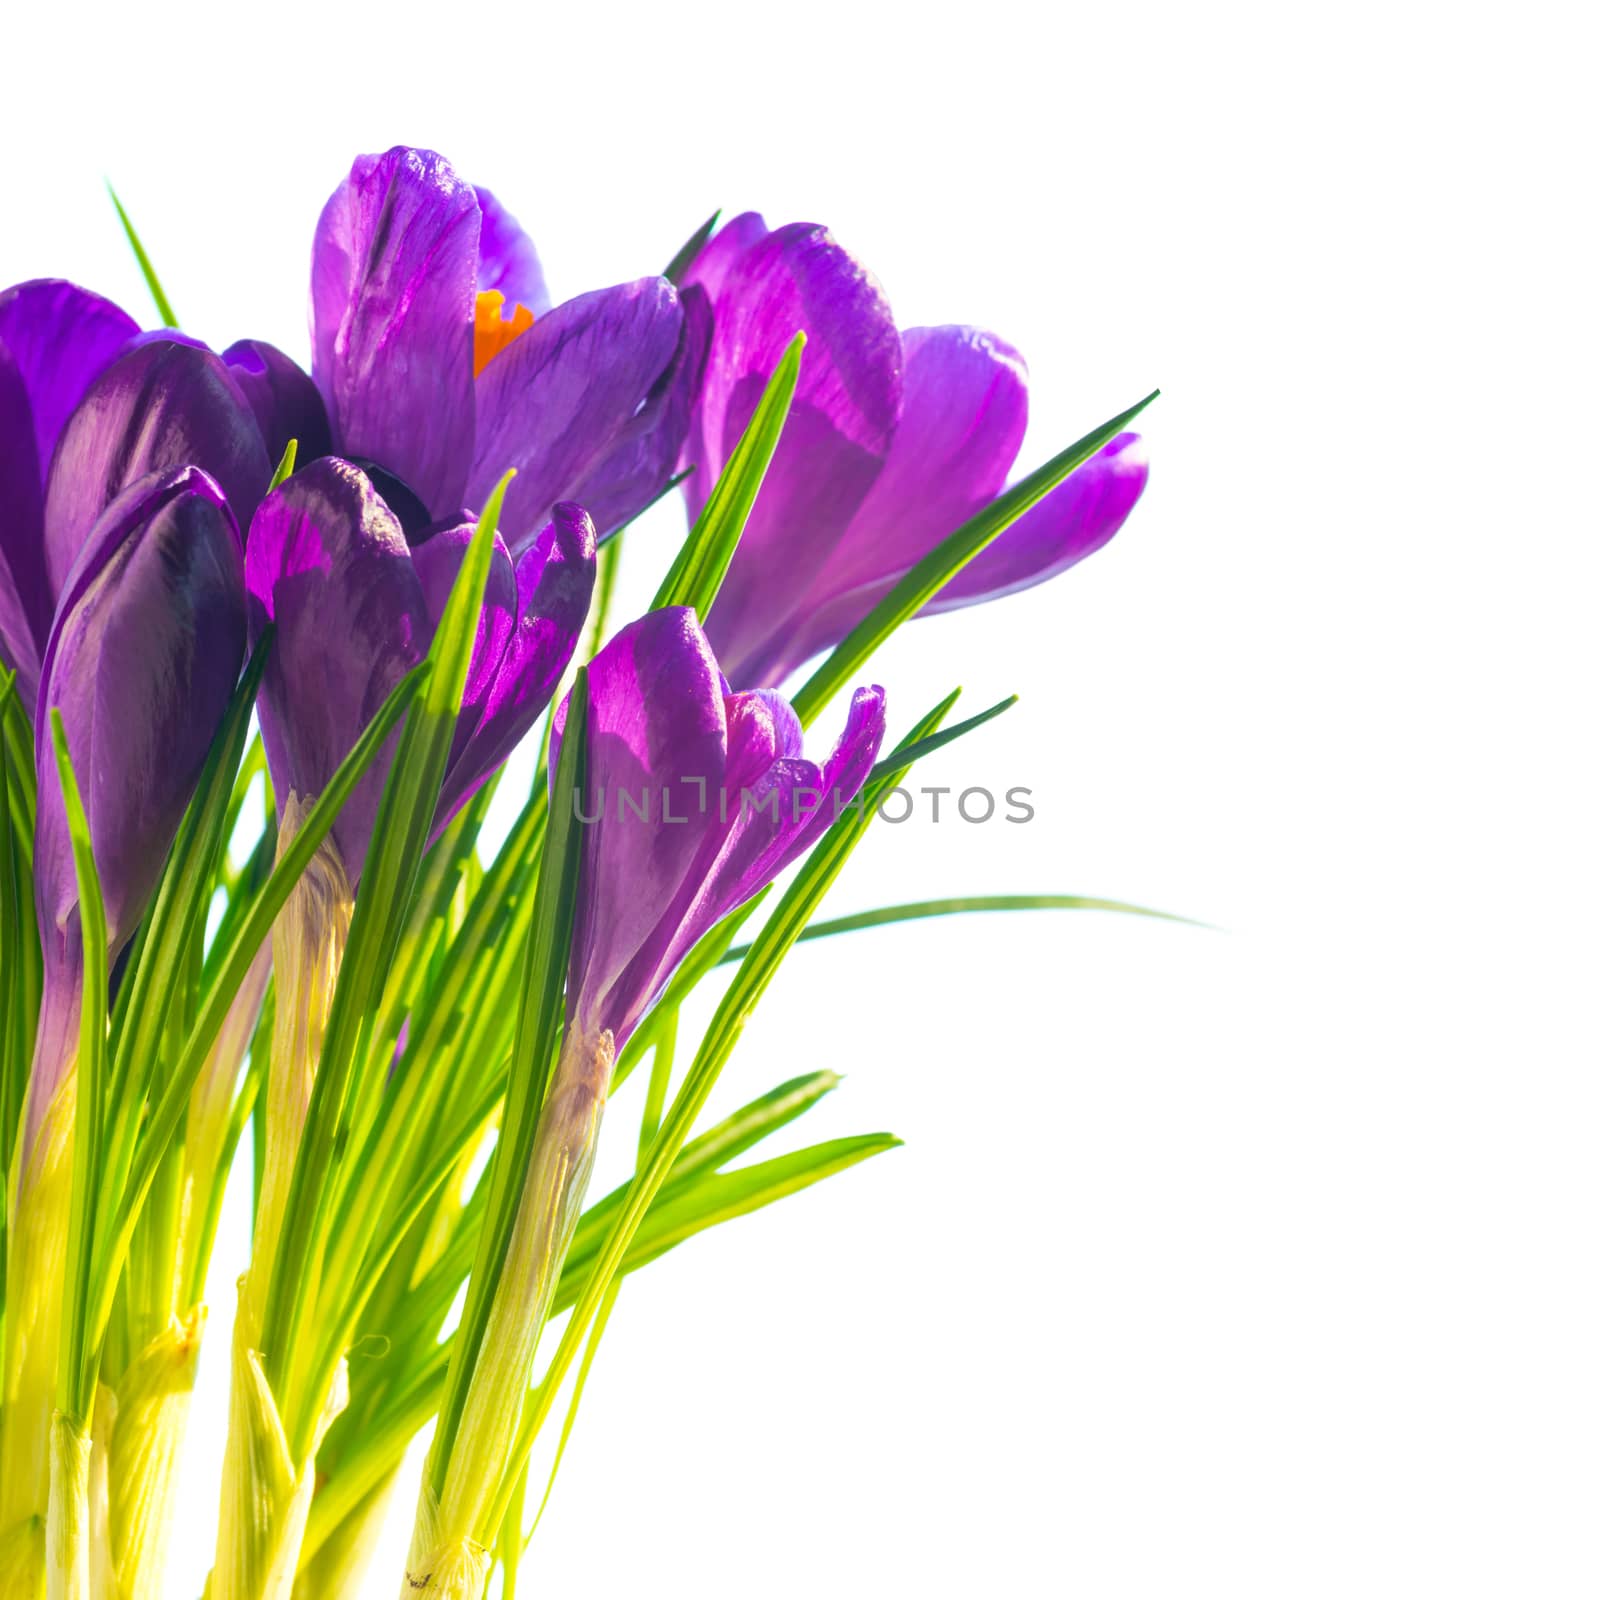 First spring flowers - bouquet of purple crocuses isolated on white background with copyspace